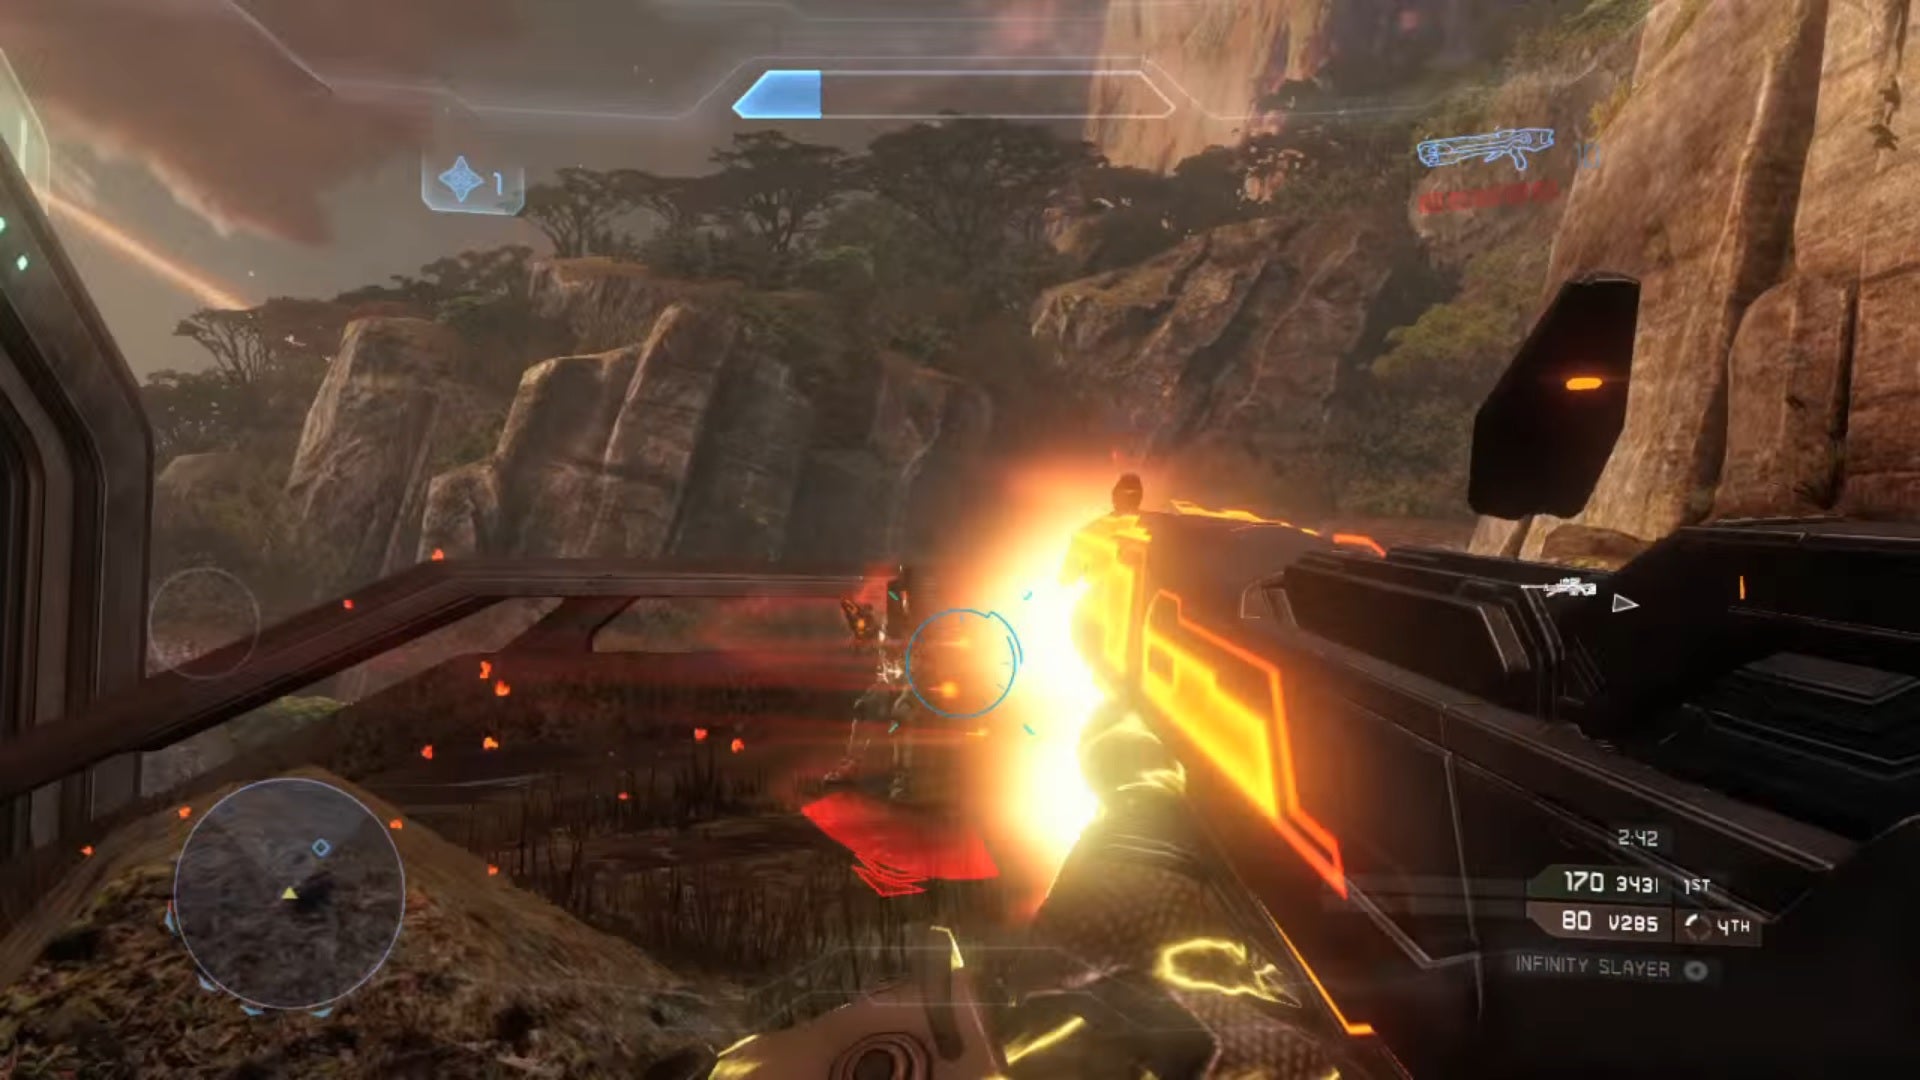 The Scattershot in Halo 4